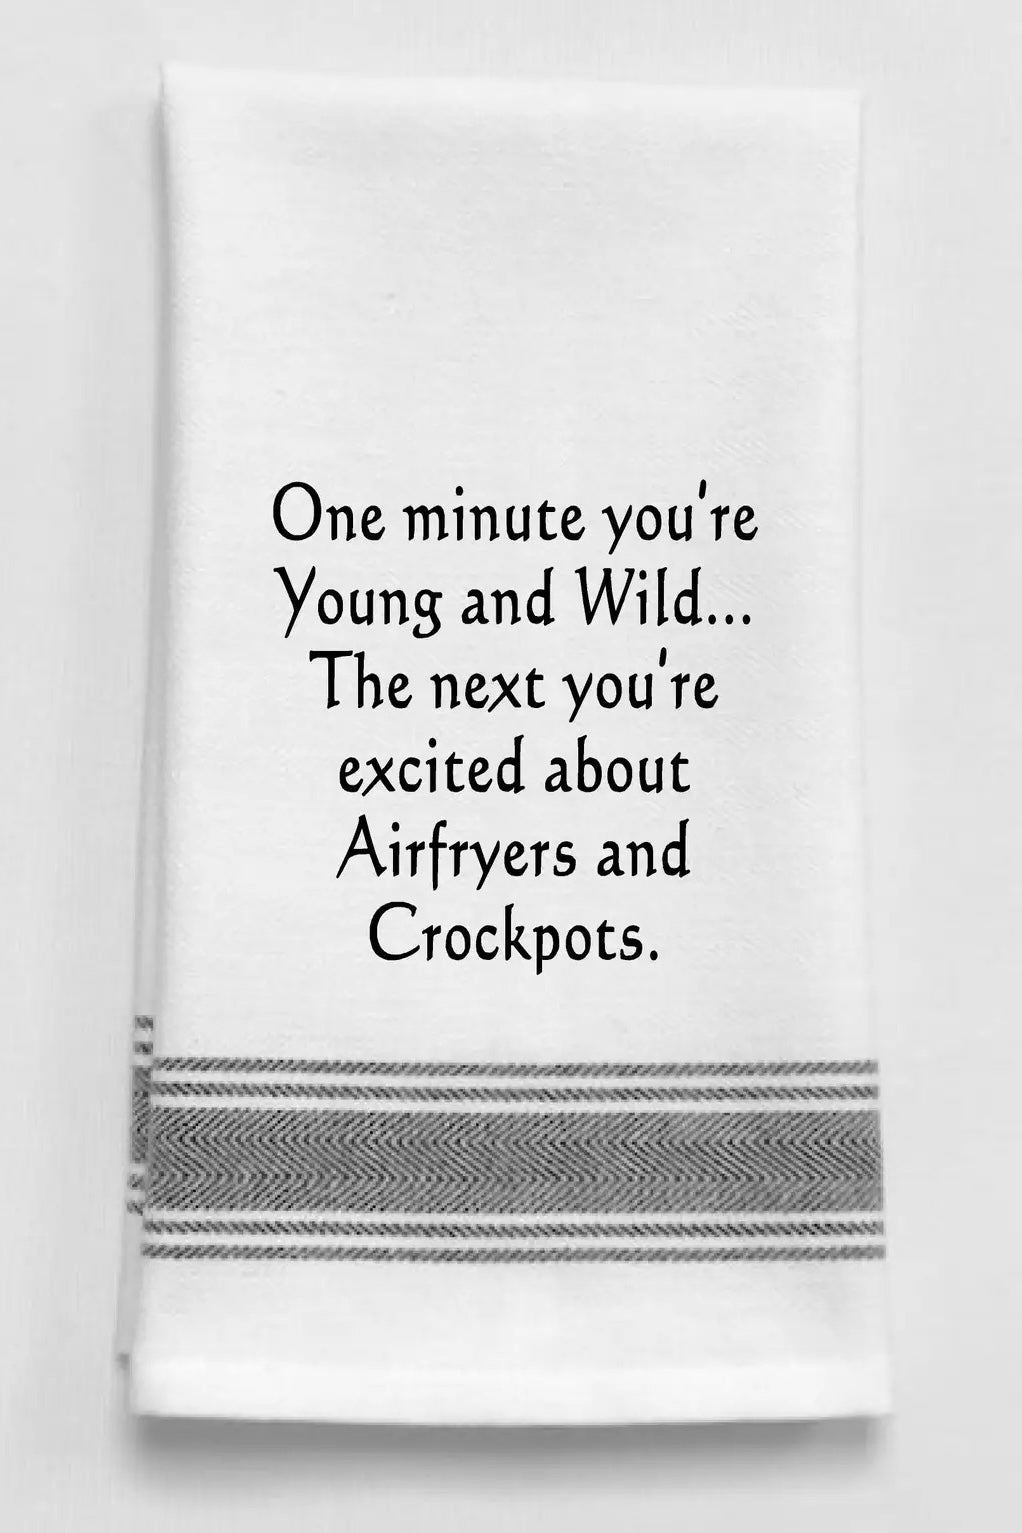 Wild Hare Tea Towels With Funny Sayings : Various – TeaElla